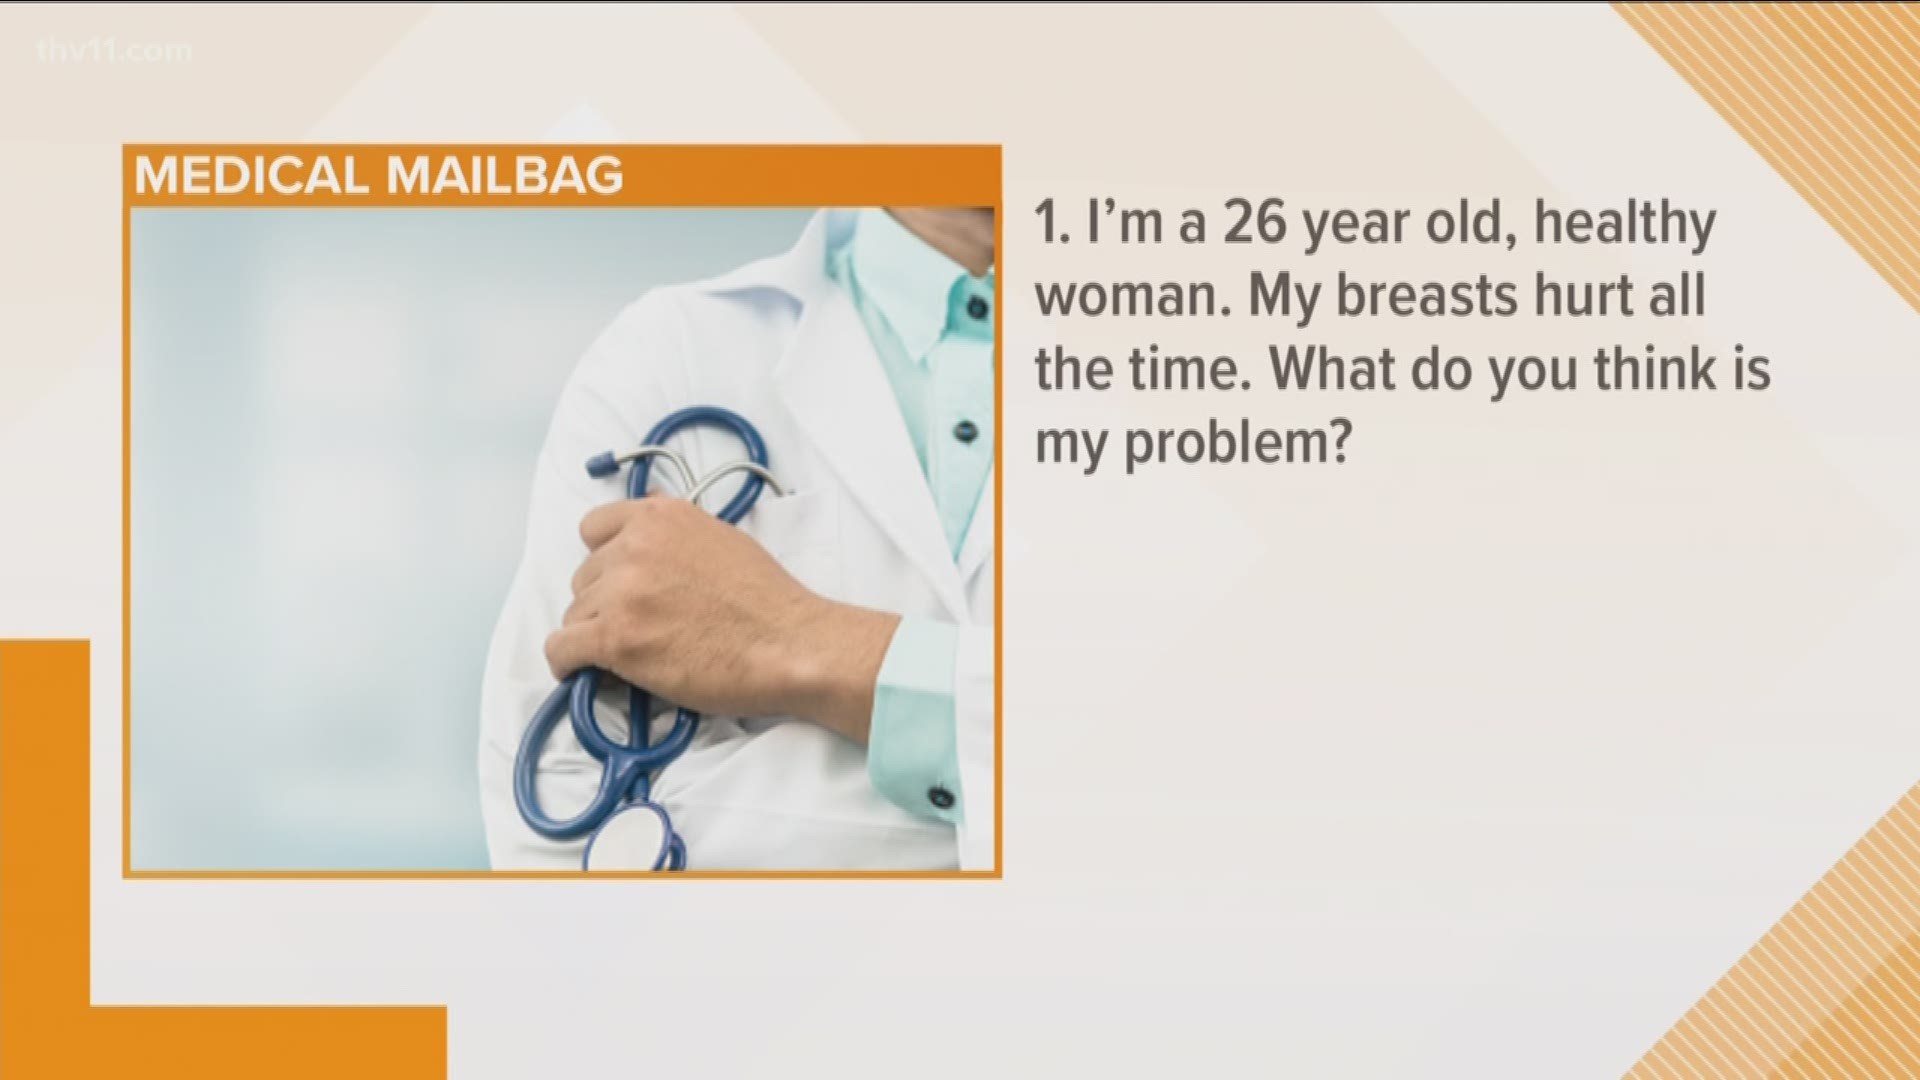 Dr. T. Glenn Pait goes through viewer-submitted questions in the medical mailbag.